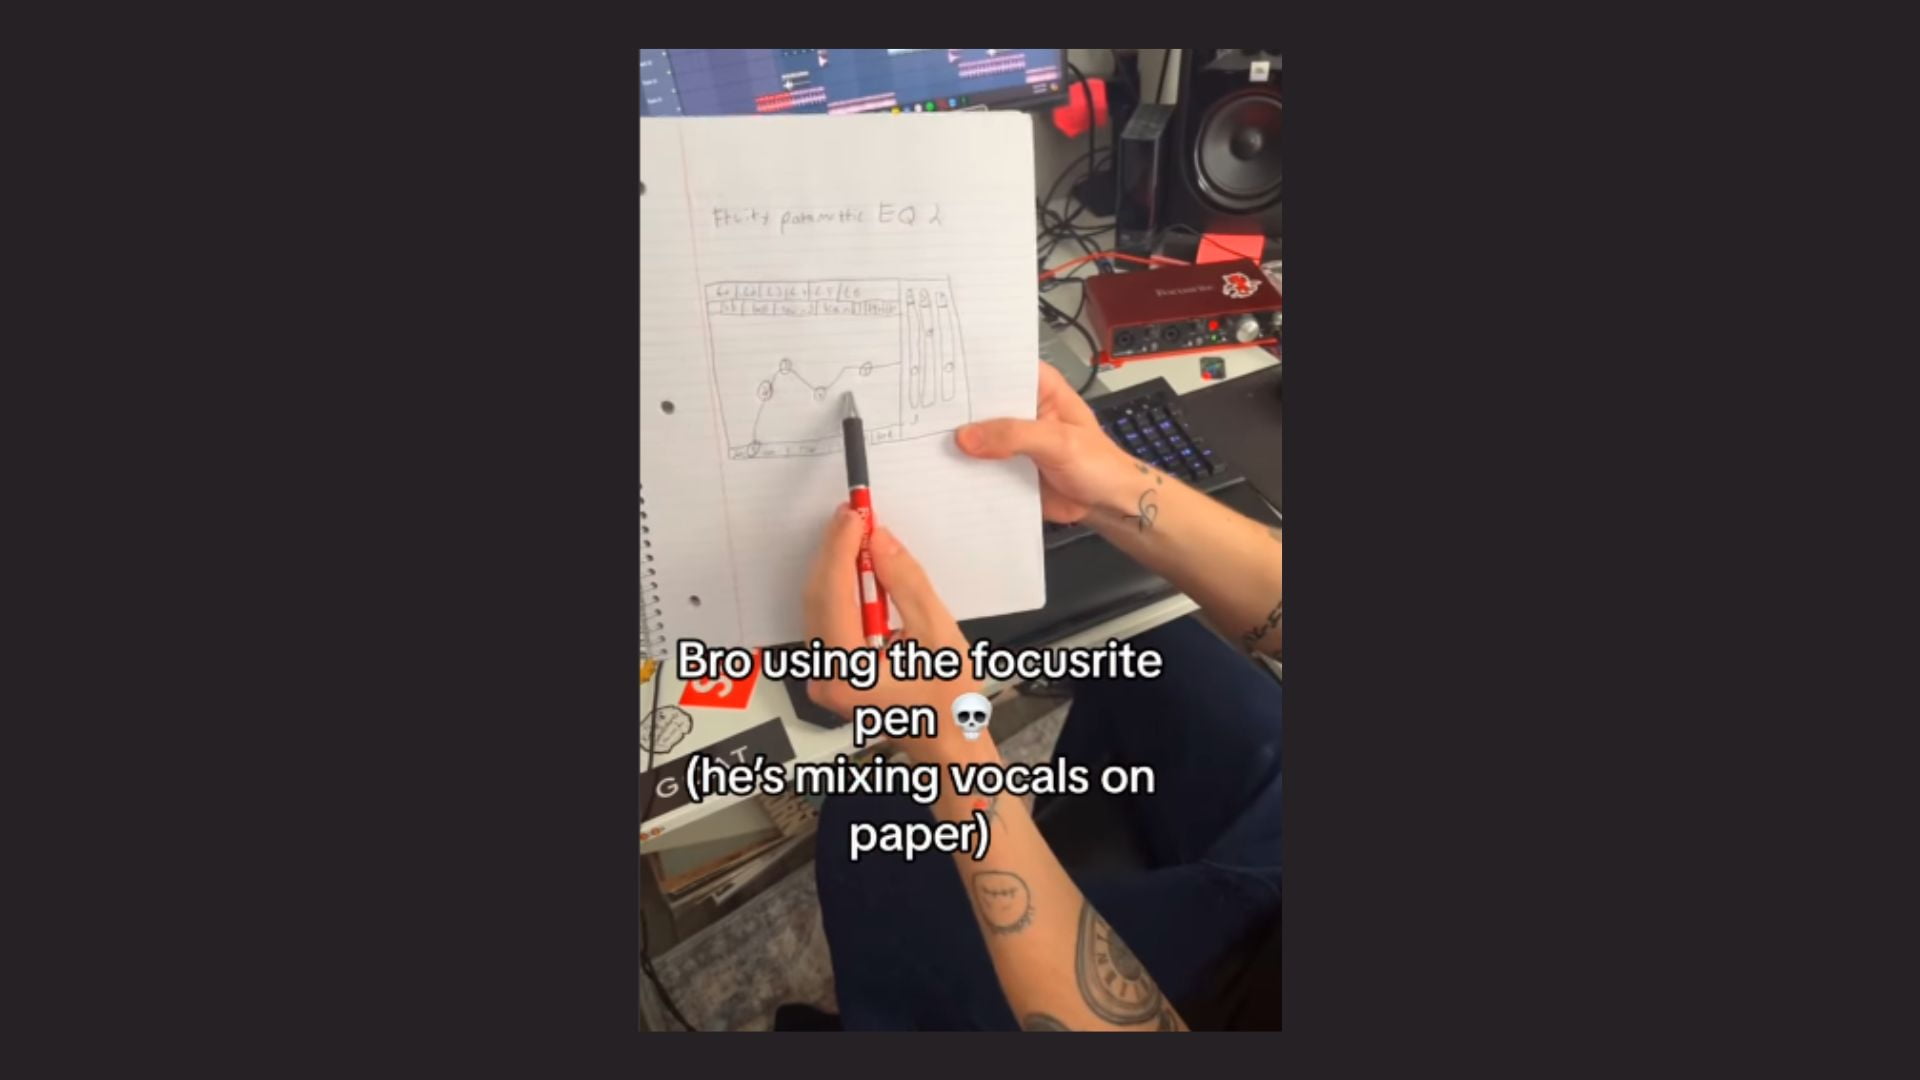 Mixing using Focusrite Pen? Video goes viral on Instagram